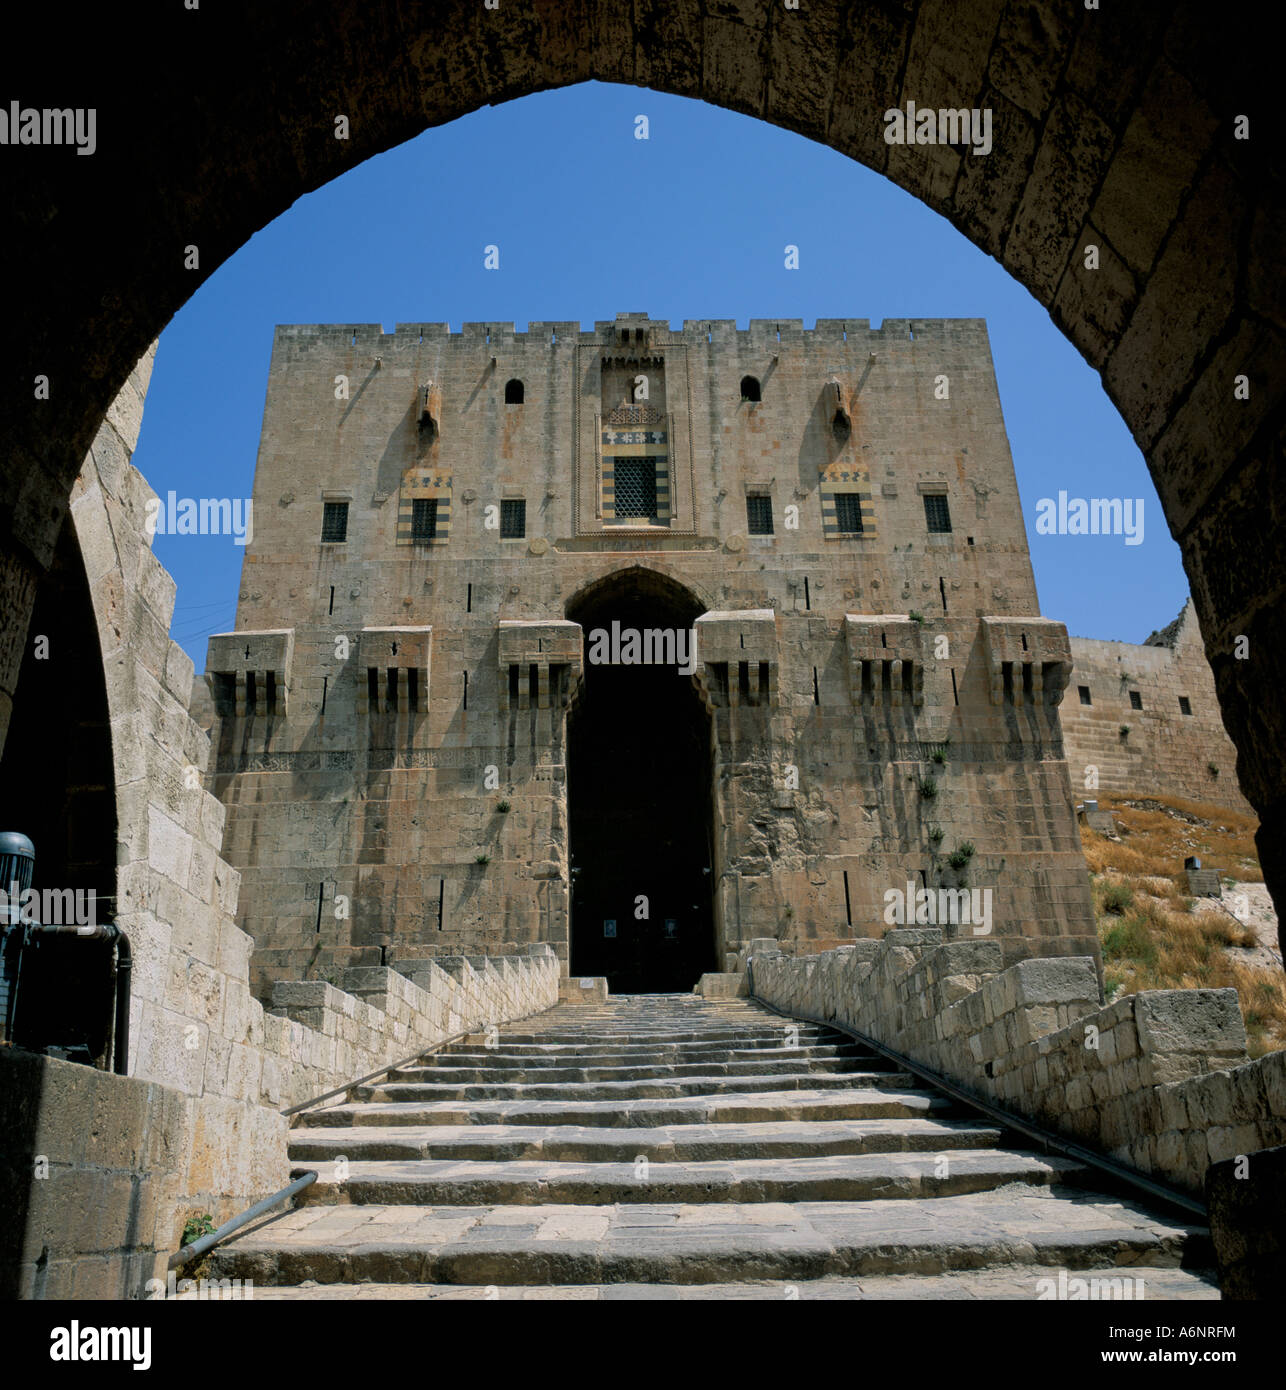 Monumental gateway dating from 1260 AD Arab Citadel Aleppo UNESCO World Heritage Site Syria Middle East Stock Photo